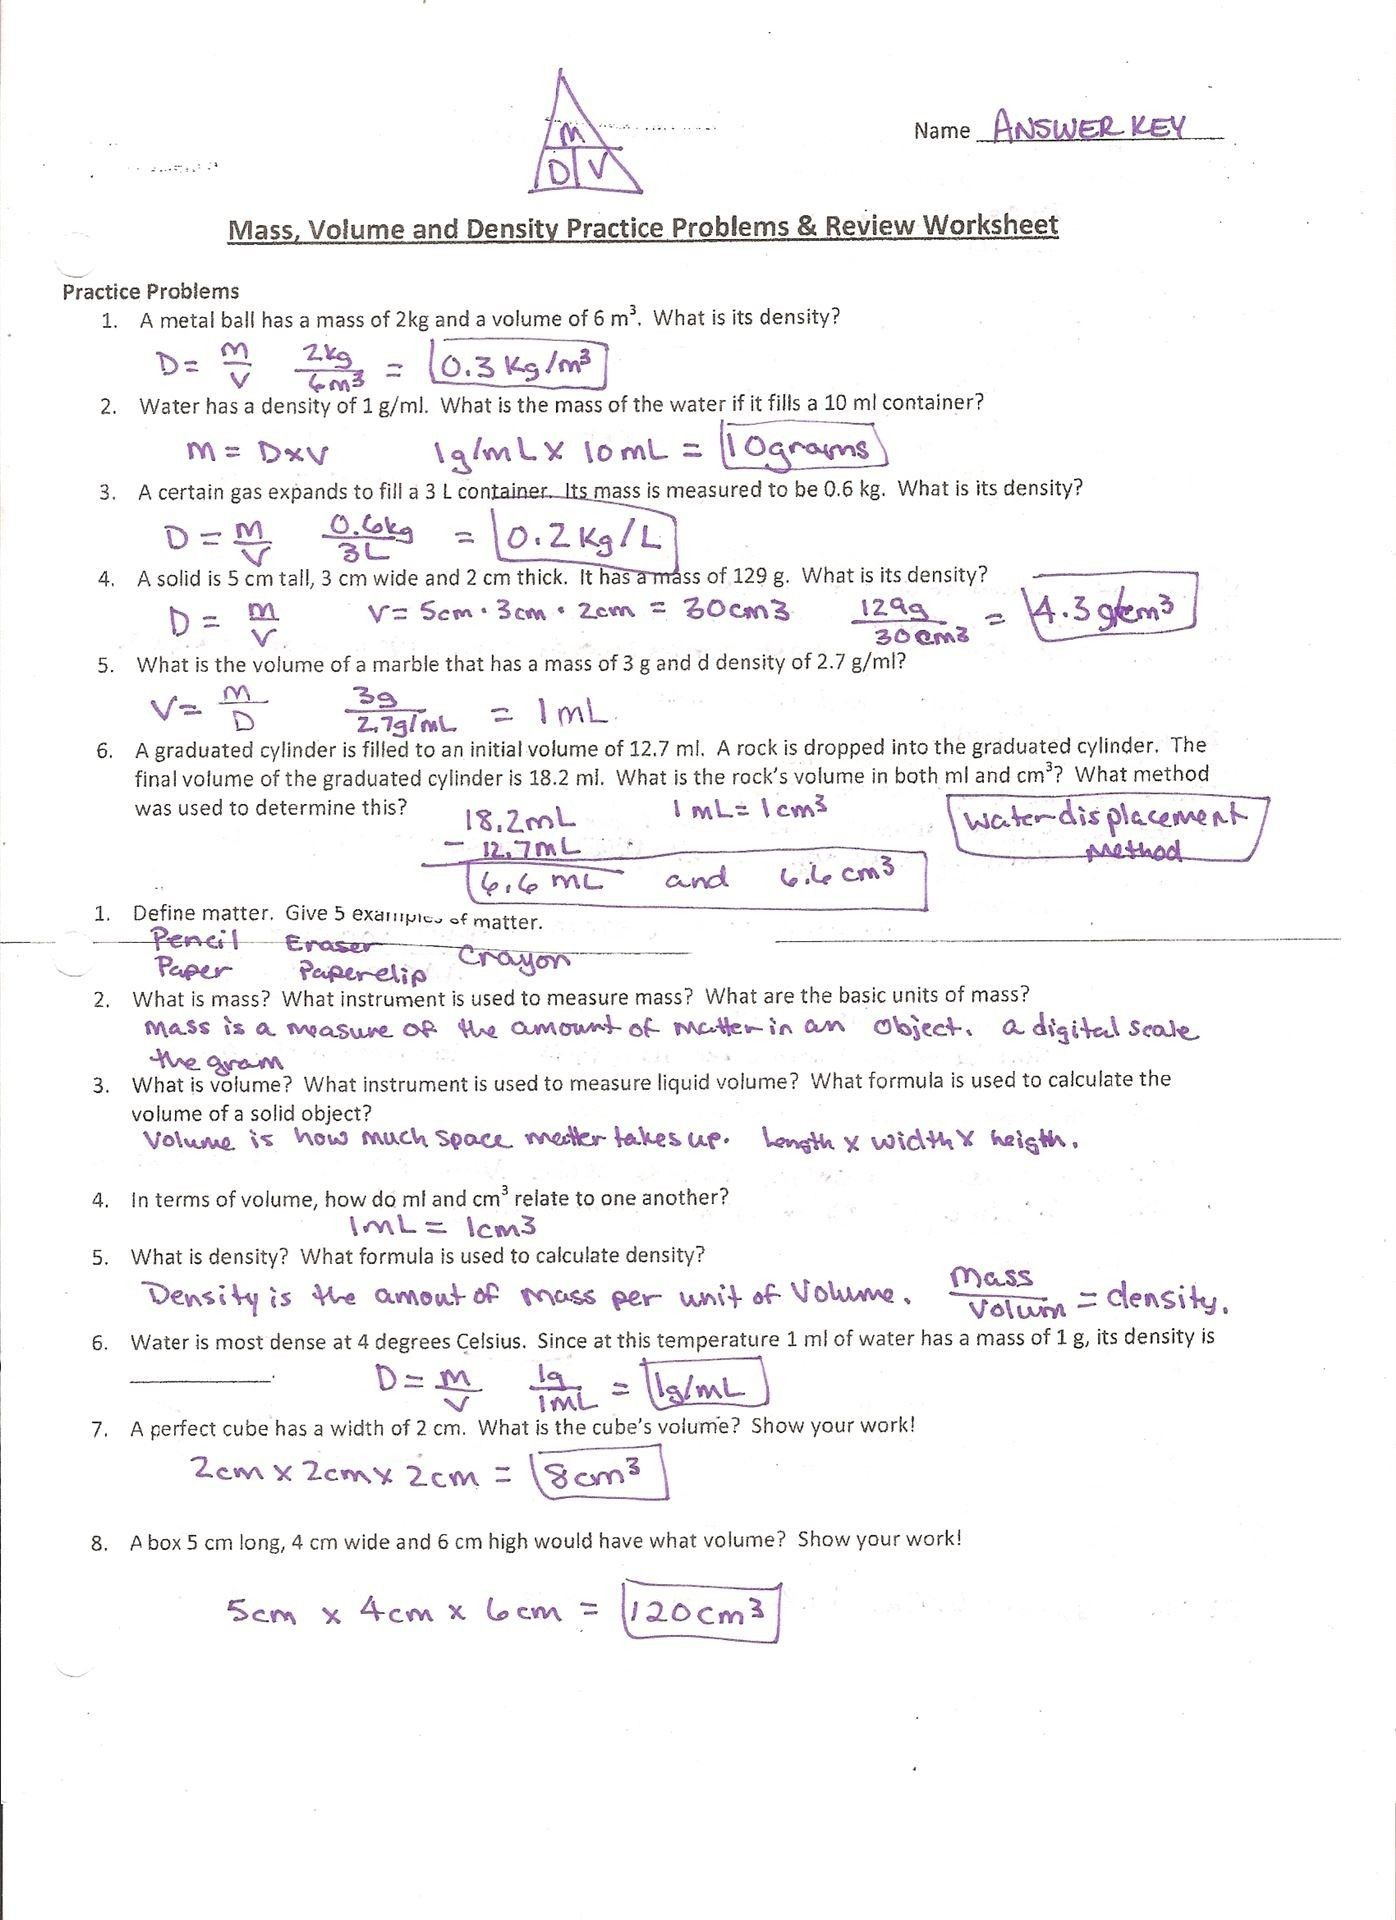 ja-28-vanlige-fakta-om-density-worksheets-with-answer-key-whether-you-re-moving-into-a-new